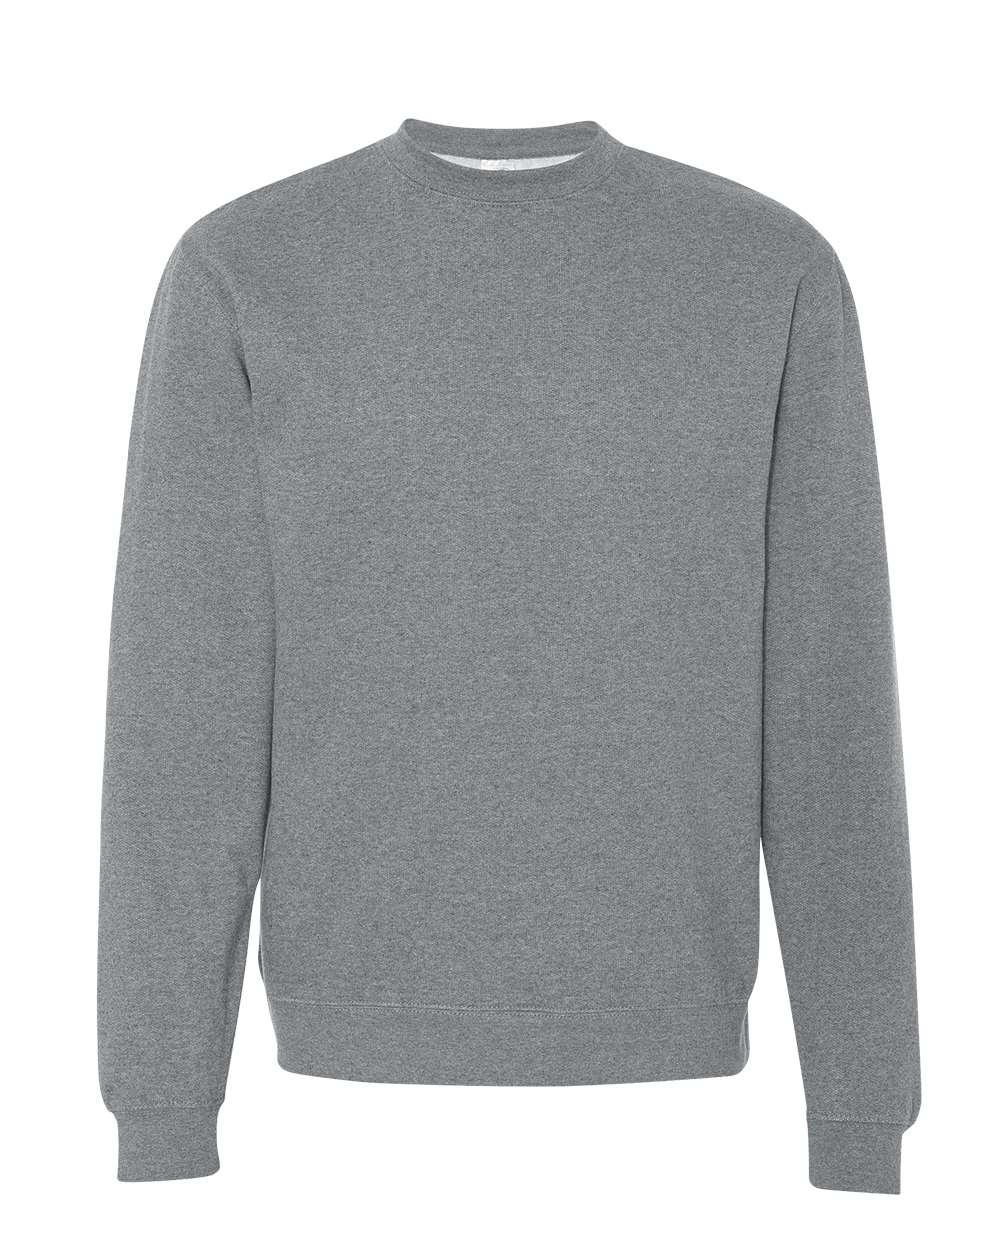 Independent Trading Co. Midweight Sweatshirt SS3000 #color_Gunmetal Heather